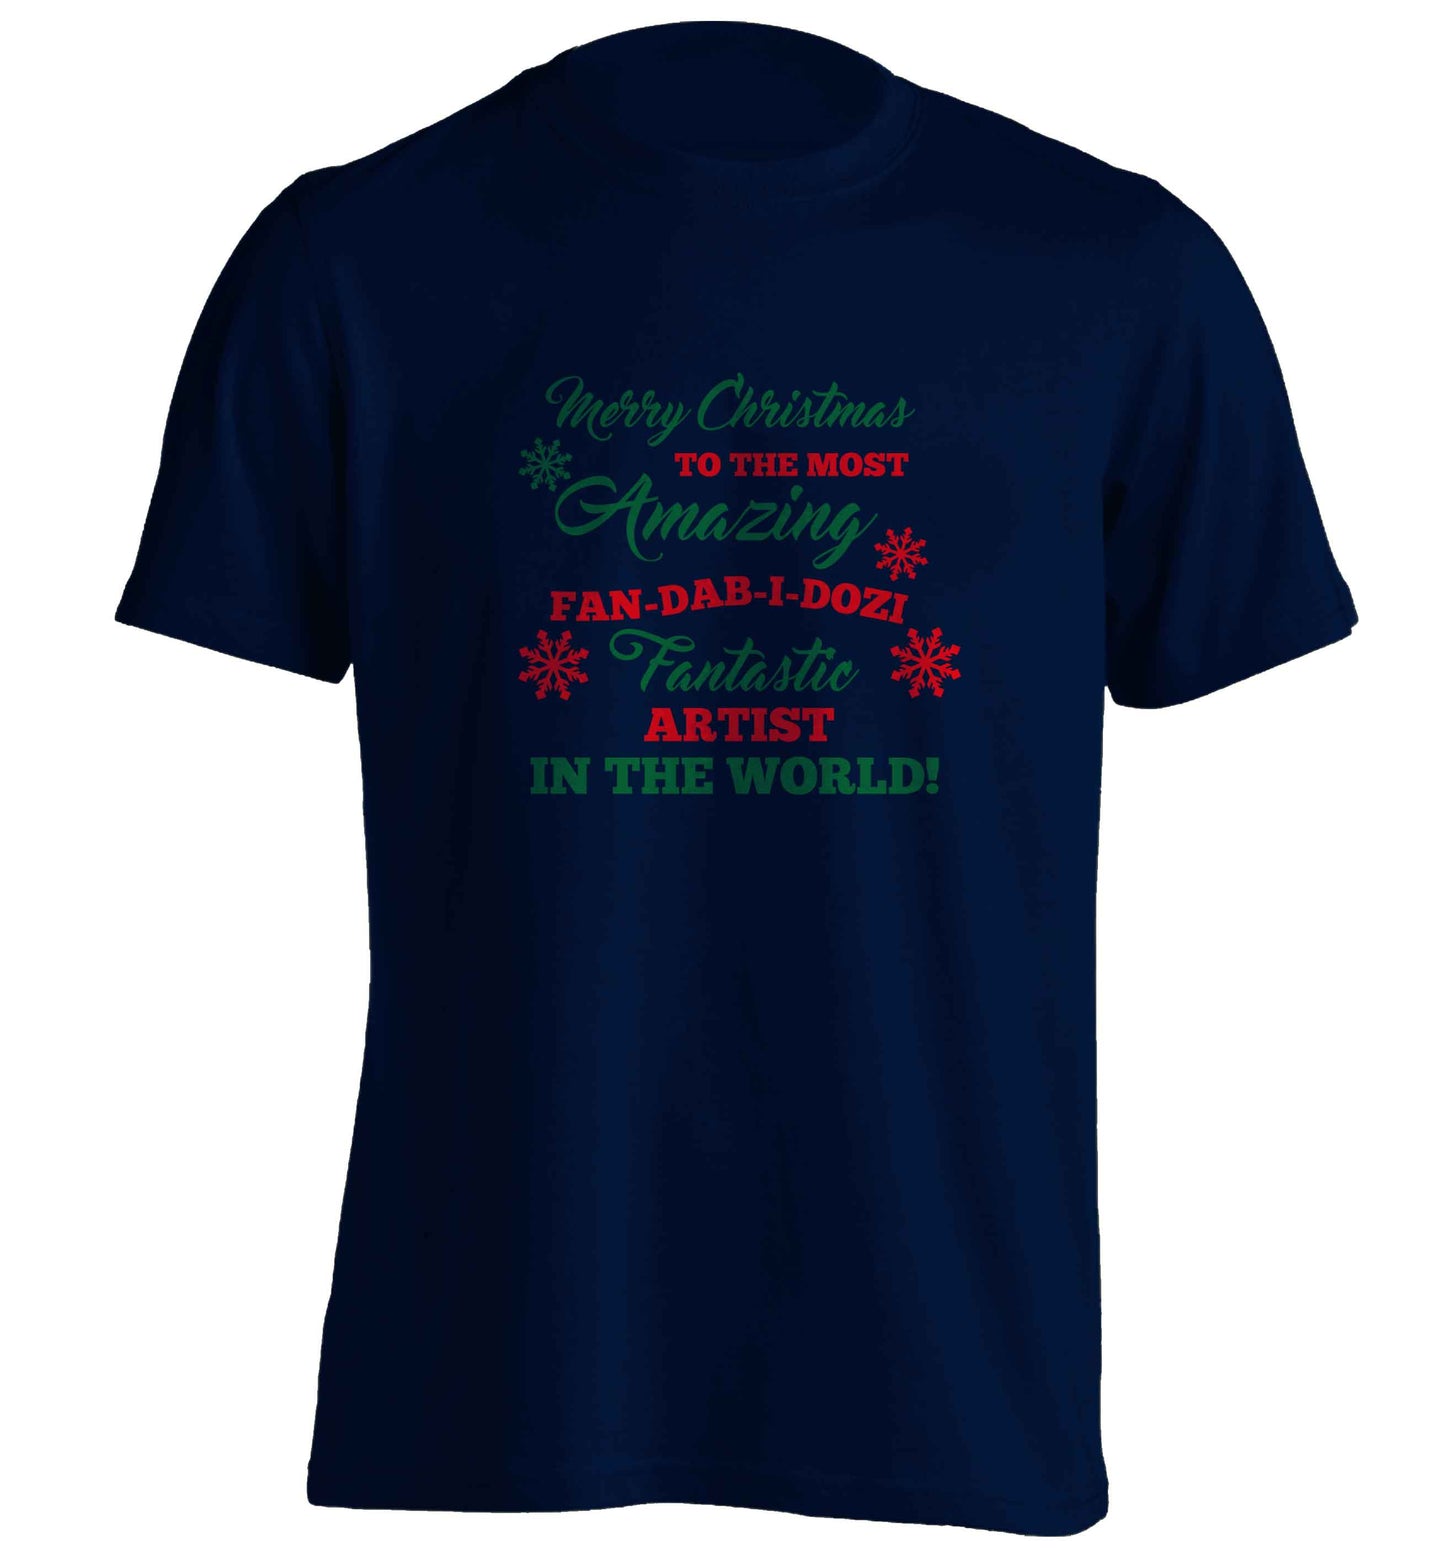 Merry Christmas to the most amazing artist in the world! adults unisex navy Tshirt 2XL